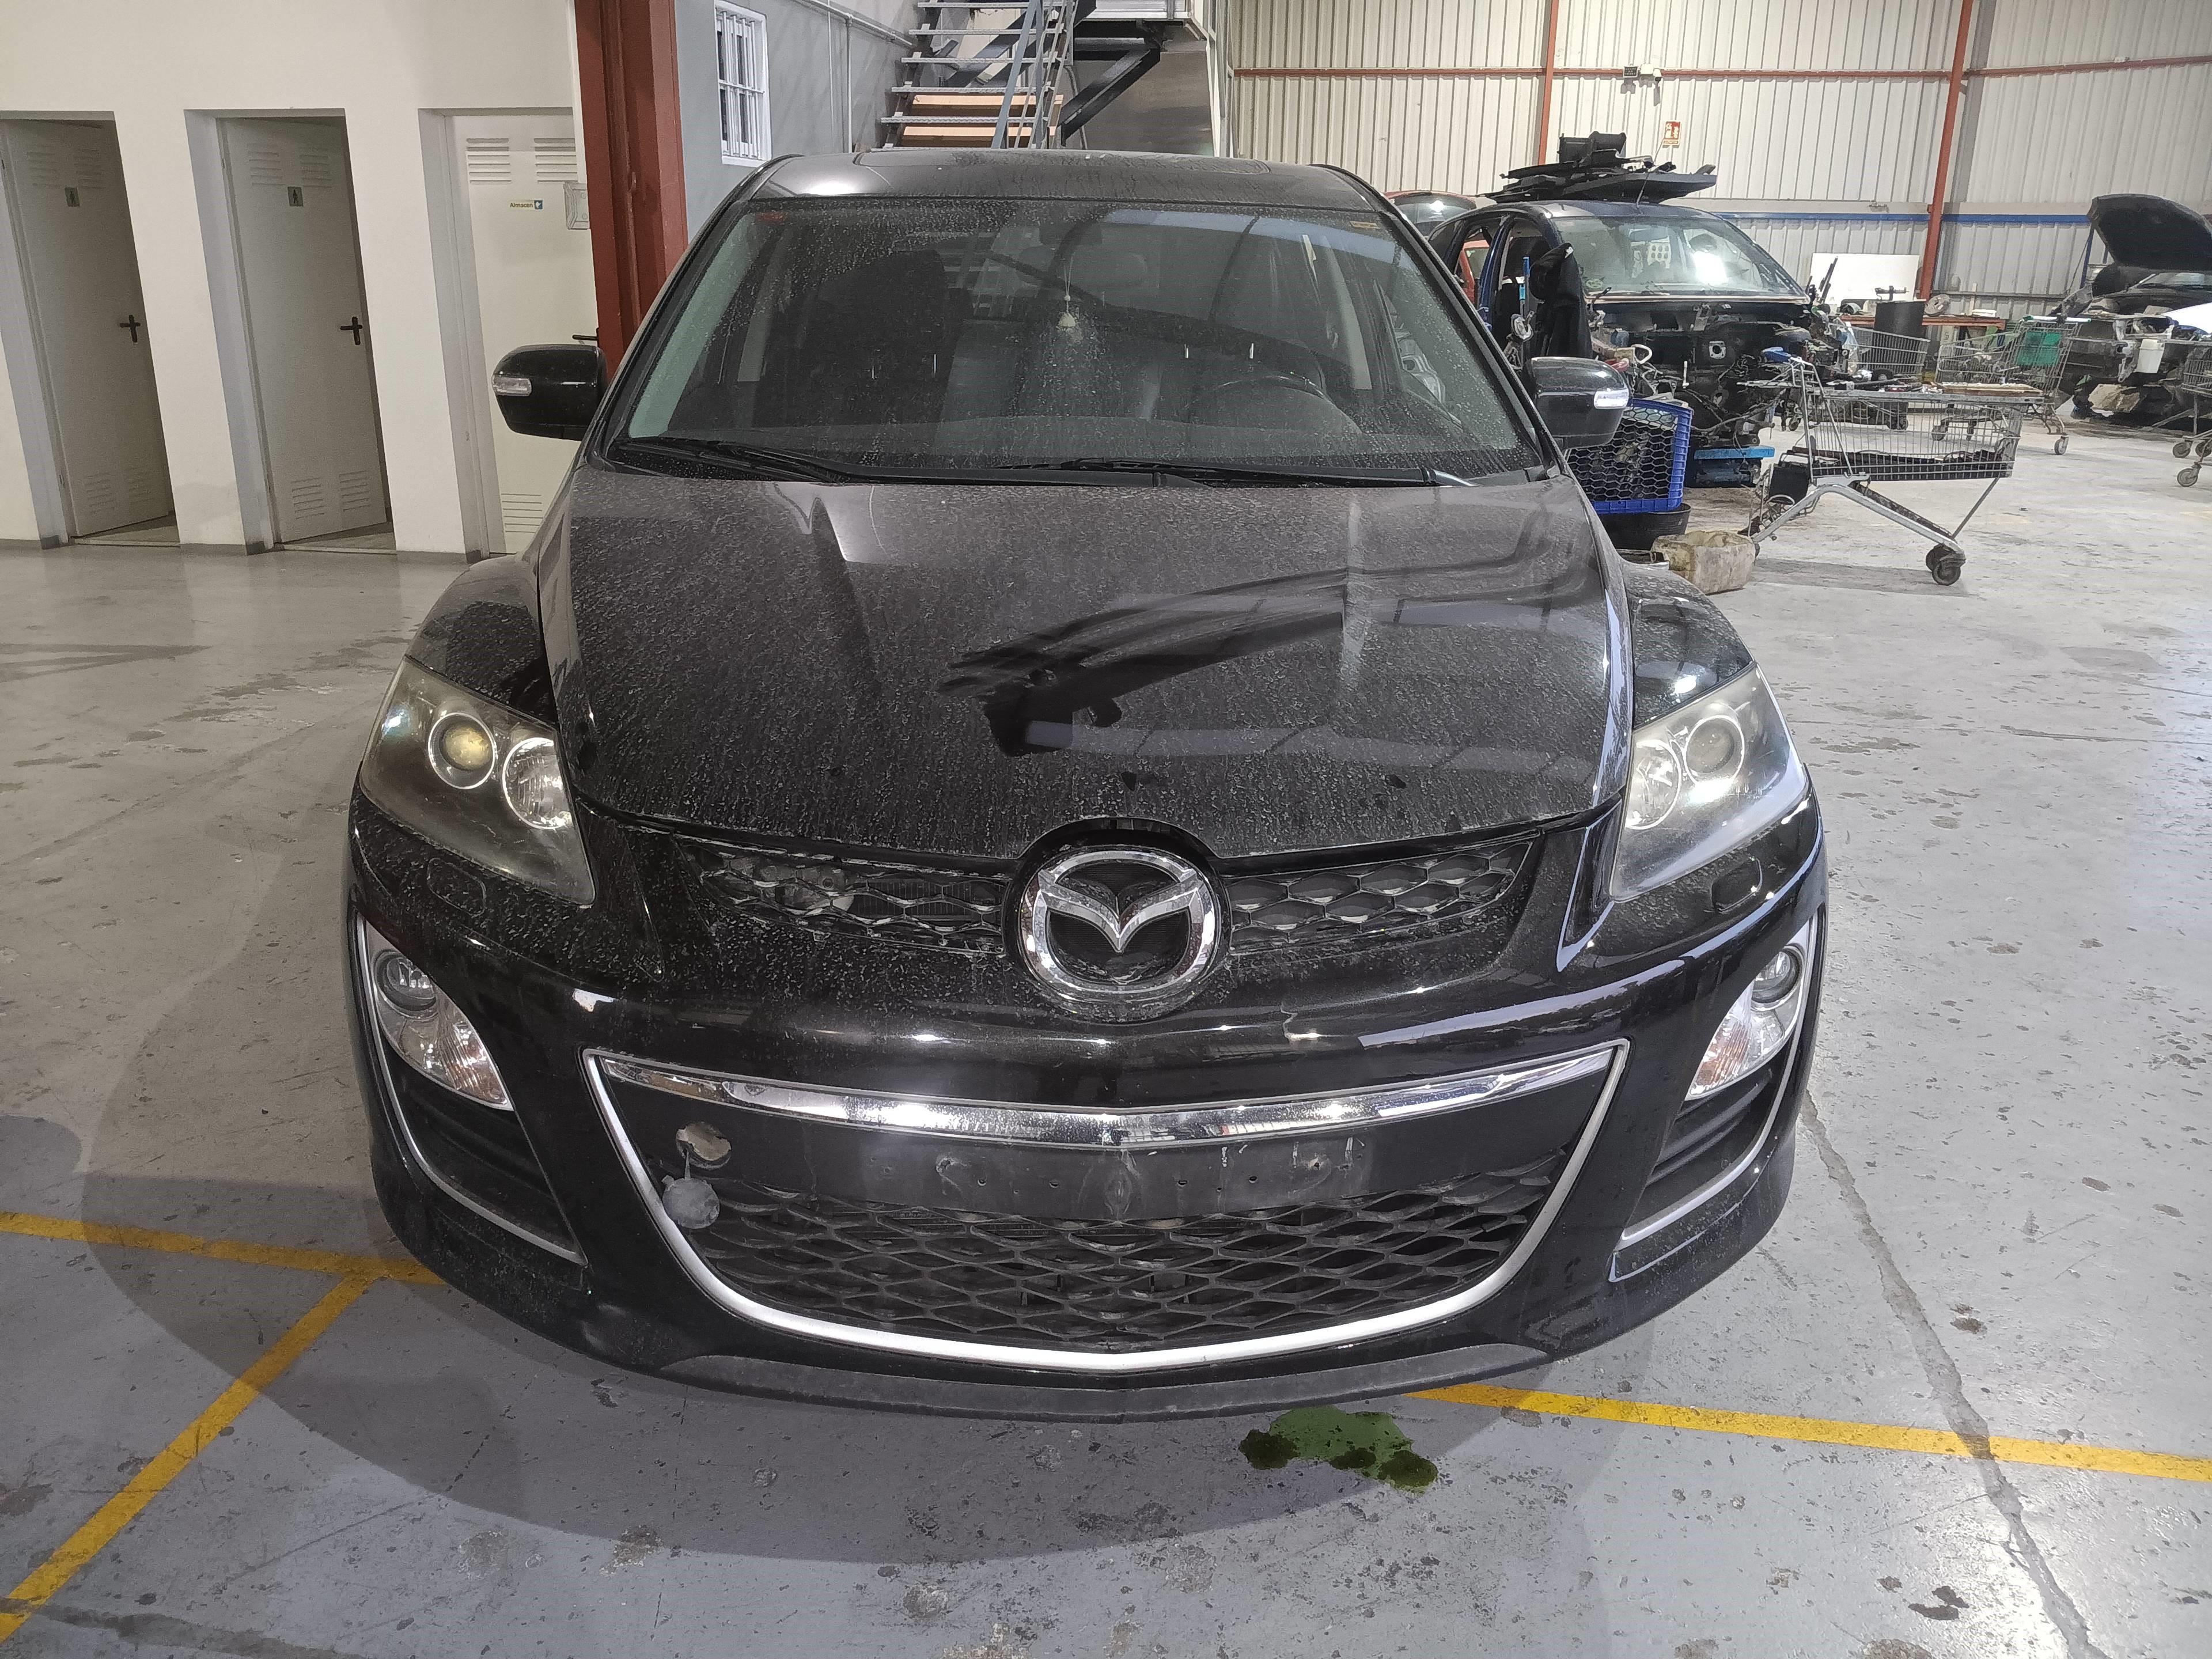 MAZDA CX-7 1 generation (2006-2012) Other Body Parts K42387390, 04M20D00081 23500439